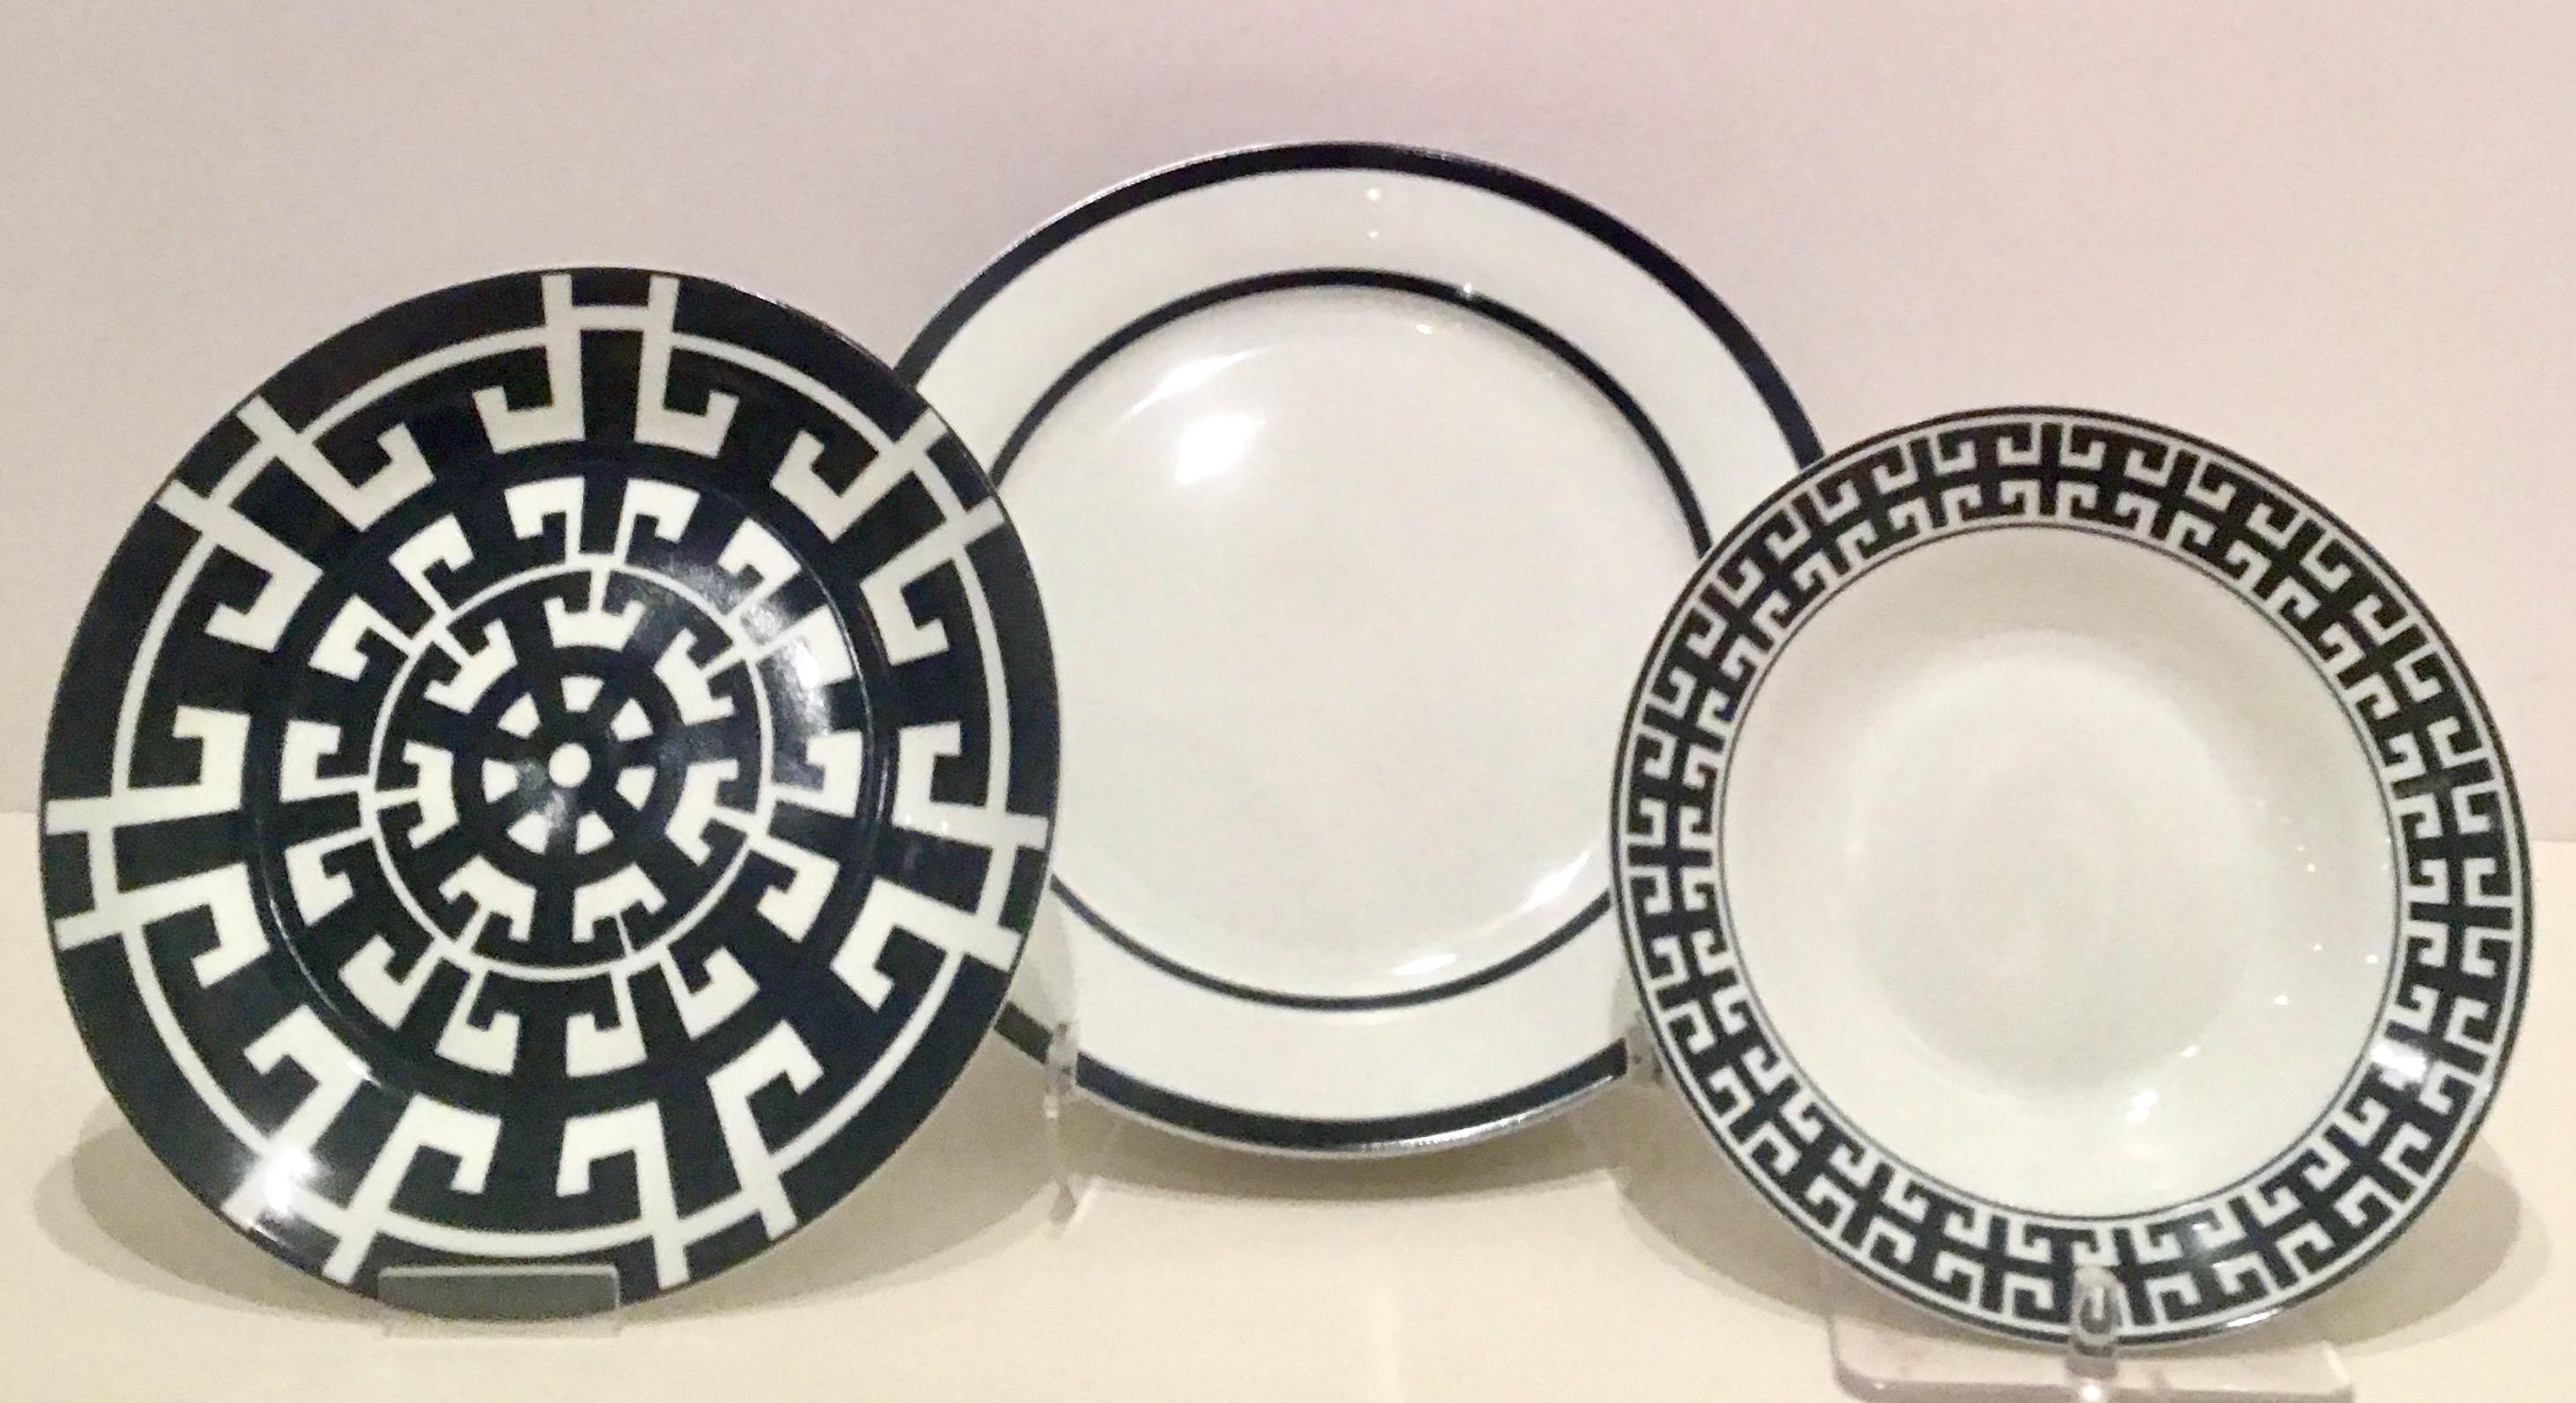 21st Century Contemporary & Modern, new geometric ceramic dinnerware set of 23 pieces by, Colin Cowie. Set features a bright white ground with navy blue pattern detail. Set includes, eight dinner plates, eight salad/dessert plate and seven coupe